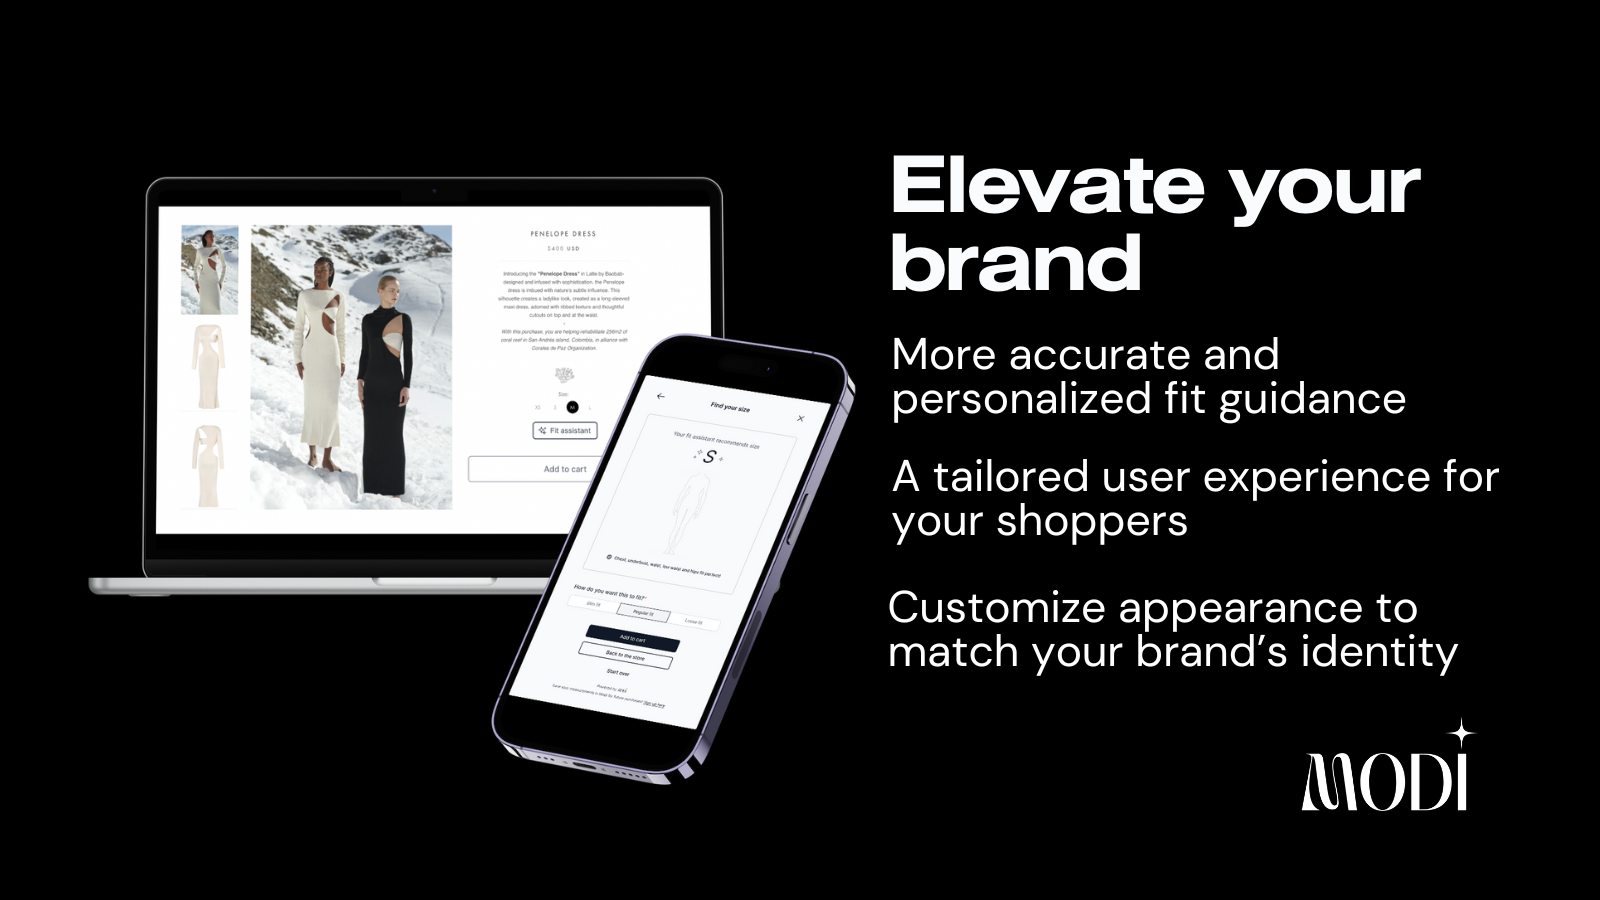 Elevate your brand experience